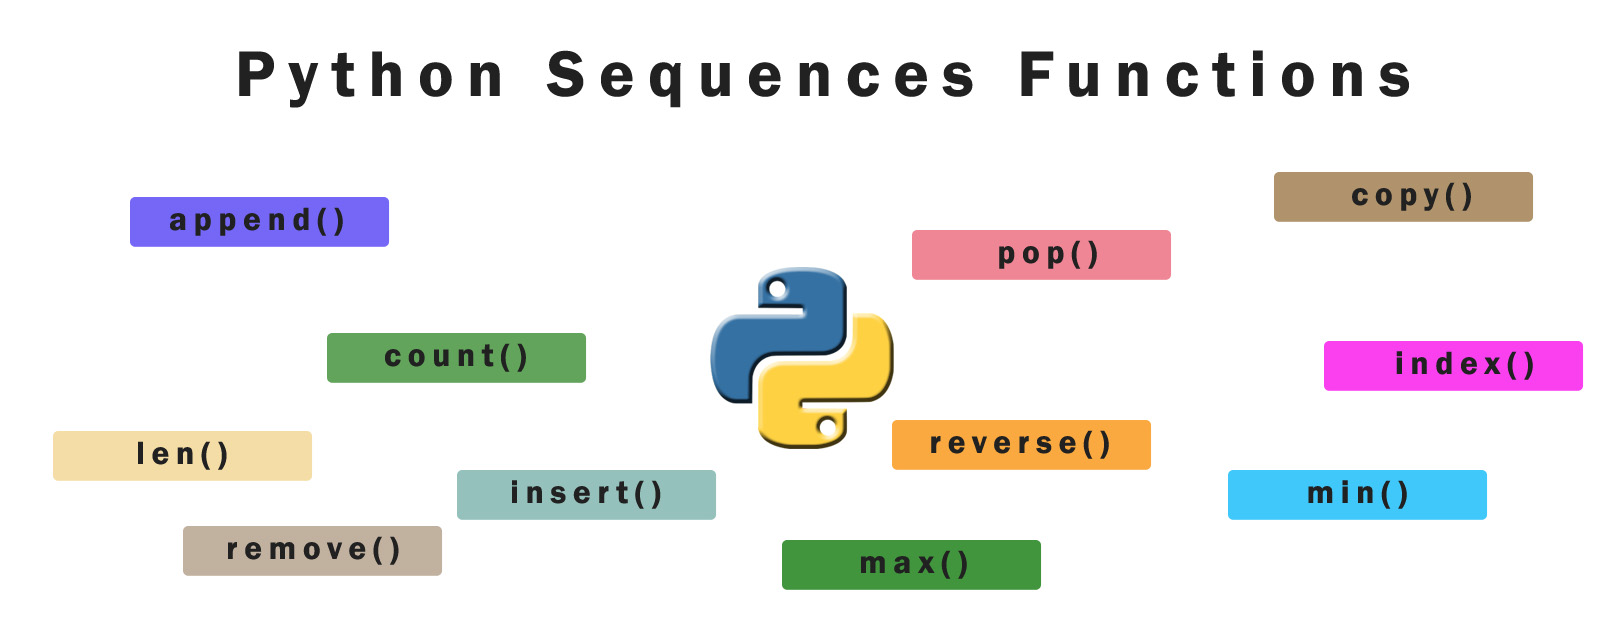 Python Sequence Functions